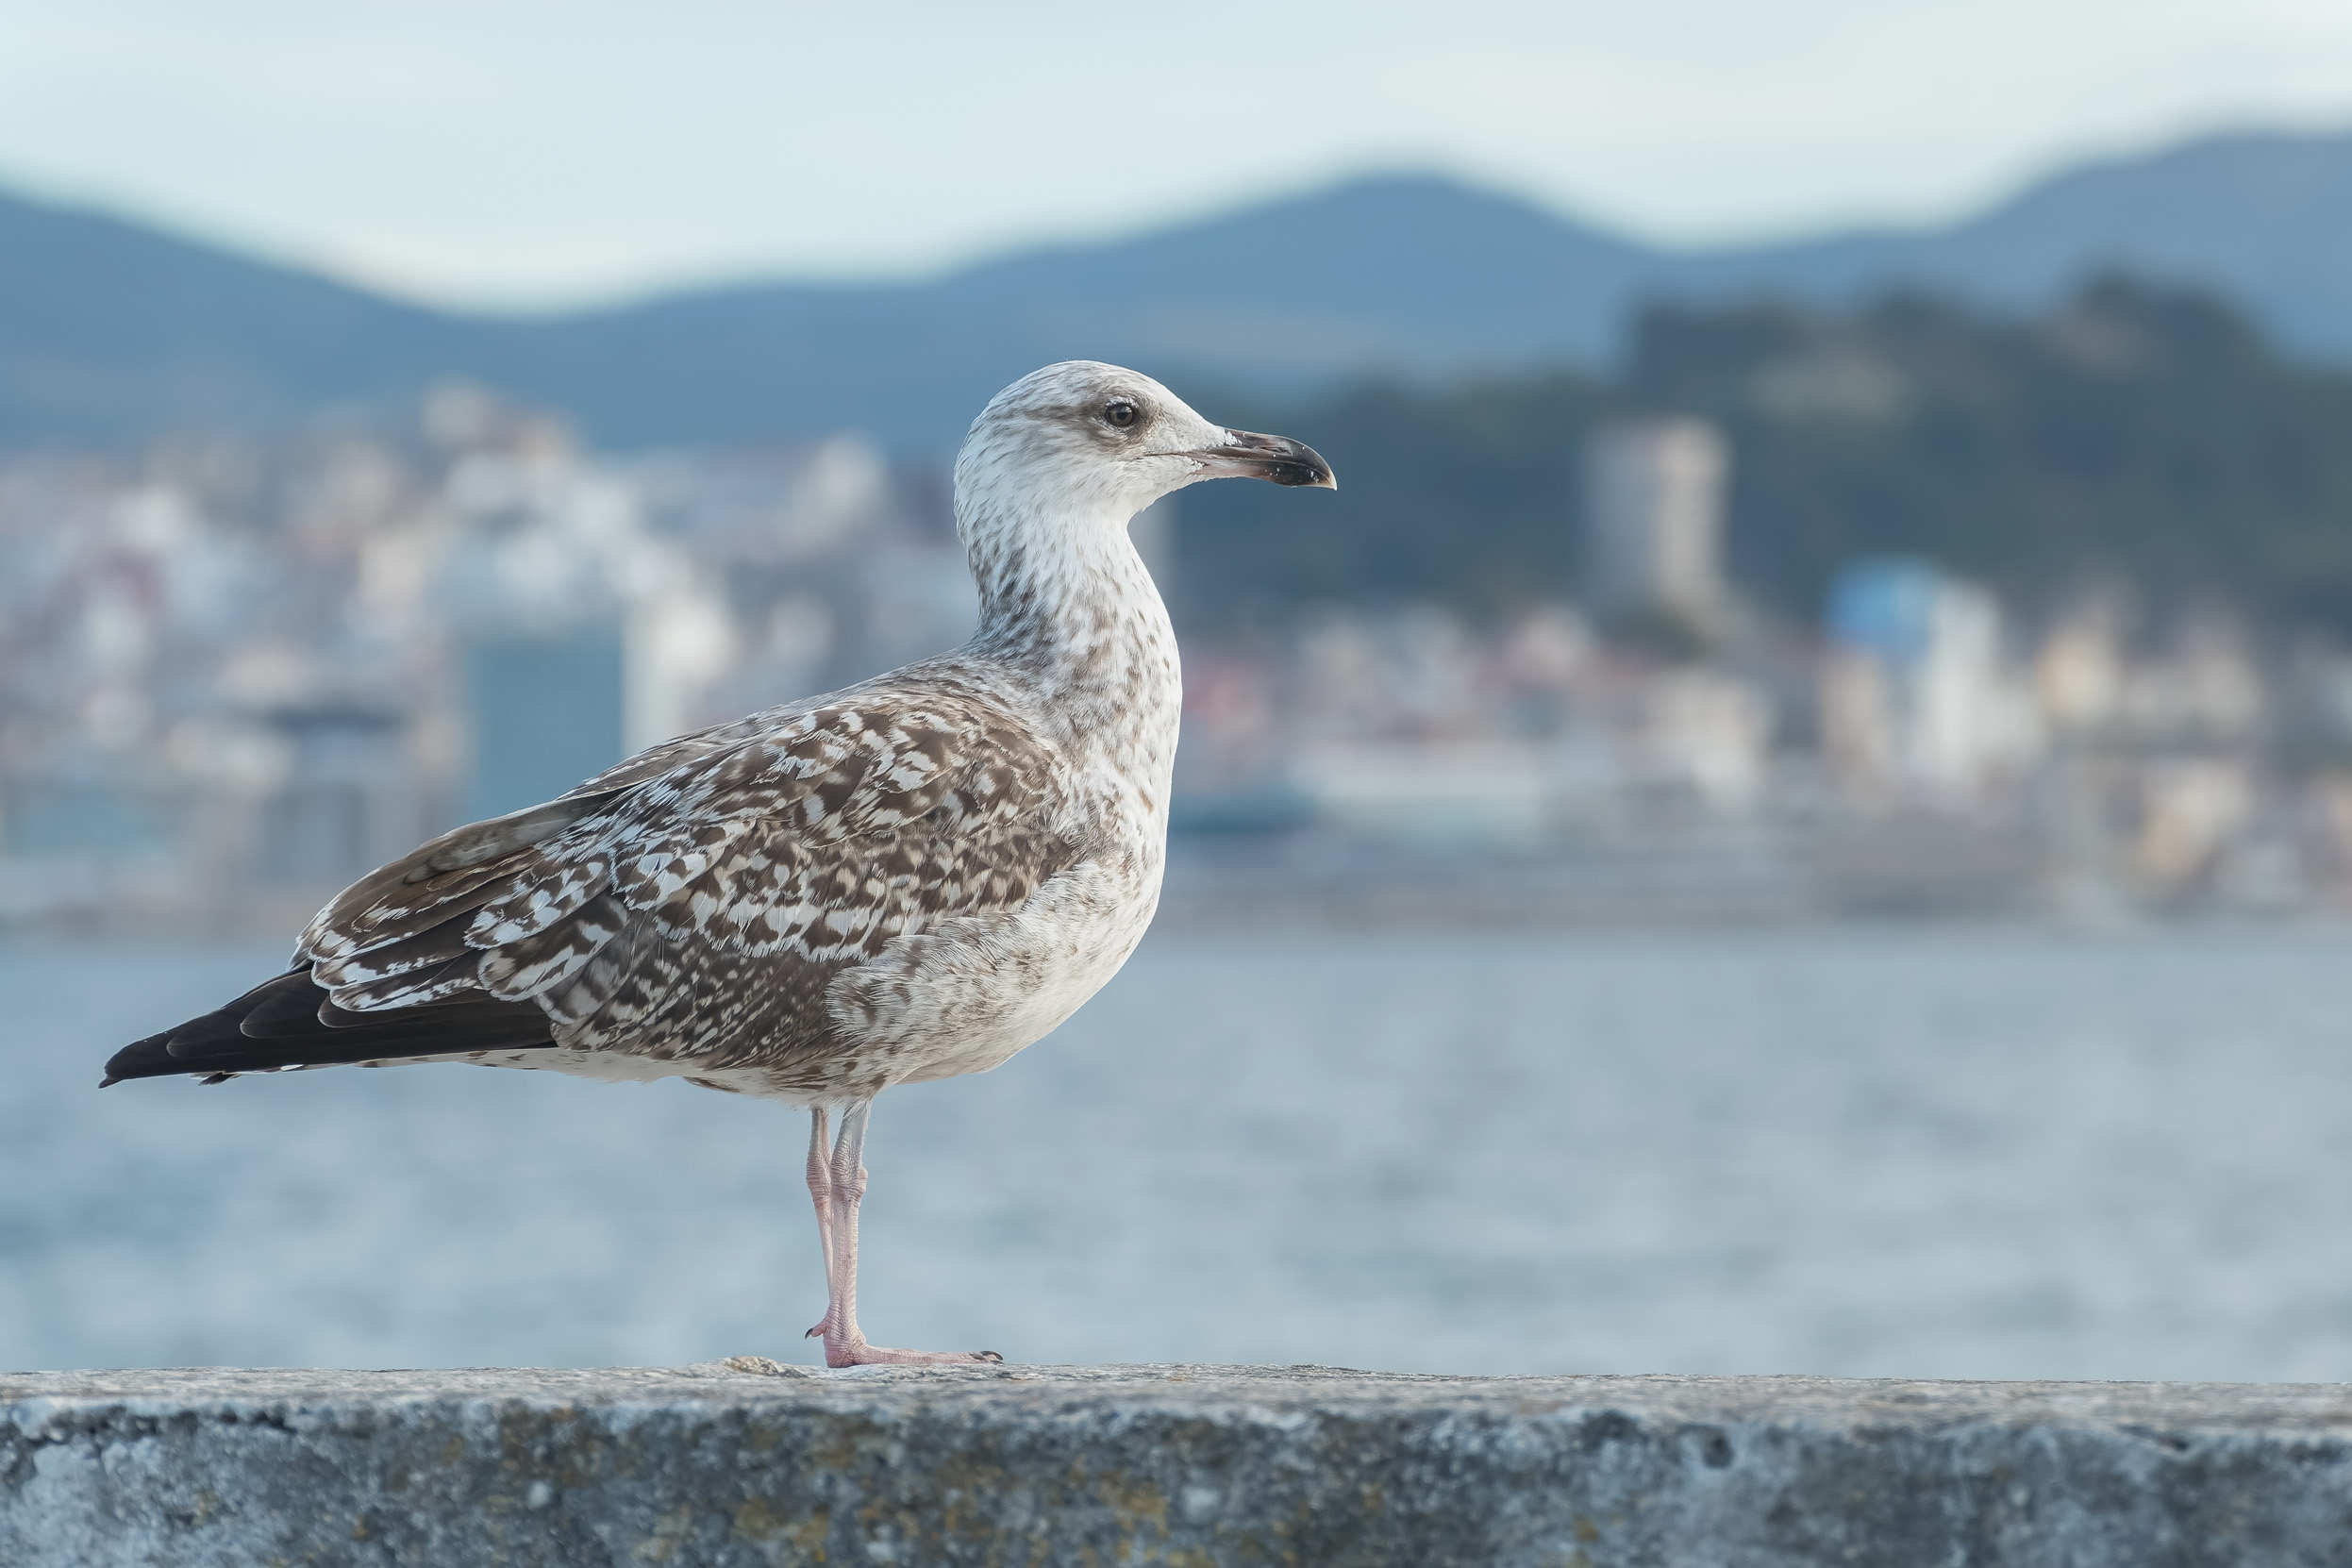 A juvenile Yellow Legged Gull in it's first winter plumage perched on a wall next to the sea with a town in the distance.